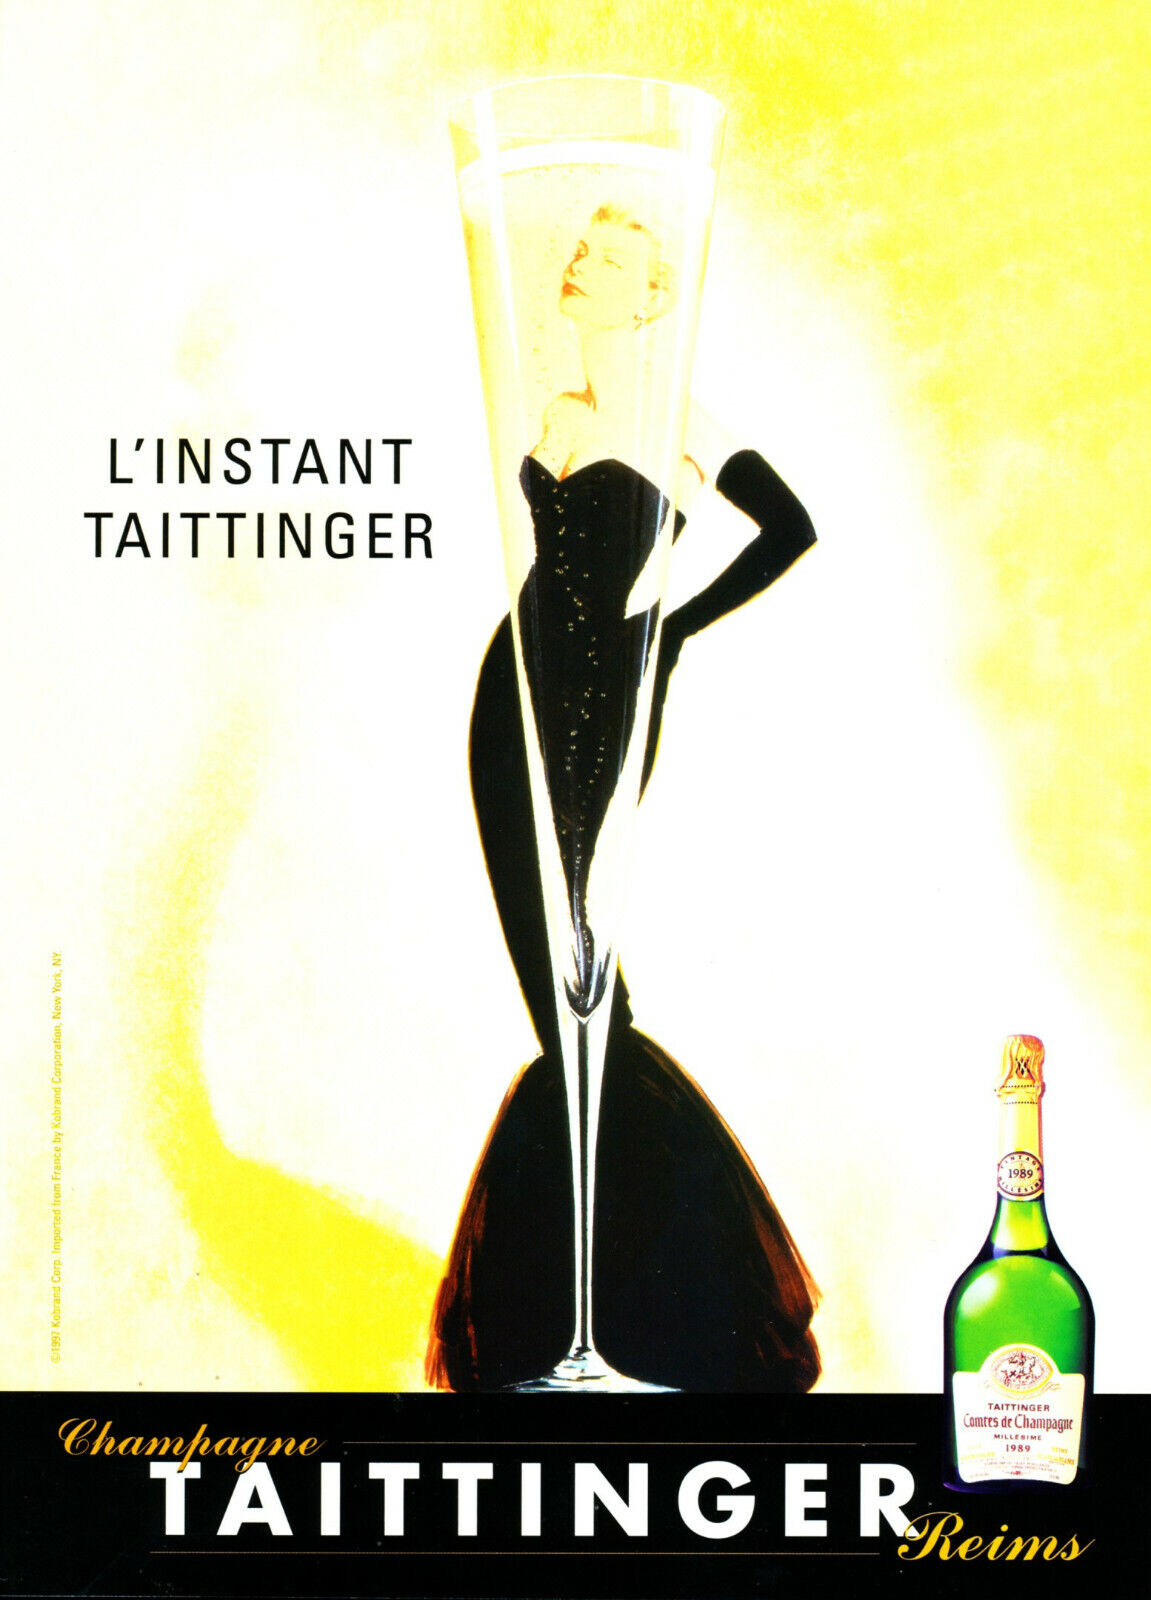 Taittinger Champagne Ad #2 Rare 1997 Out Of Print